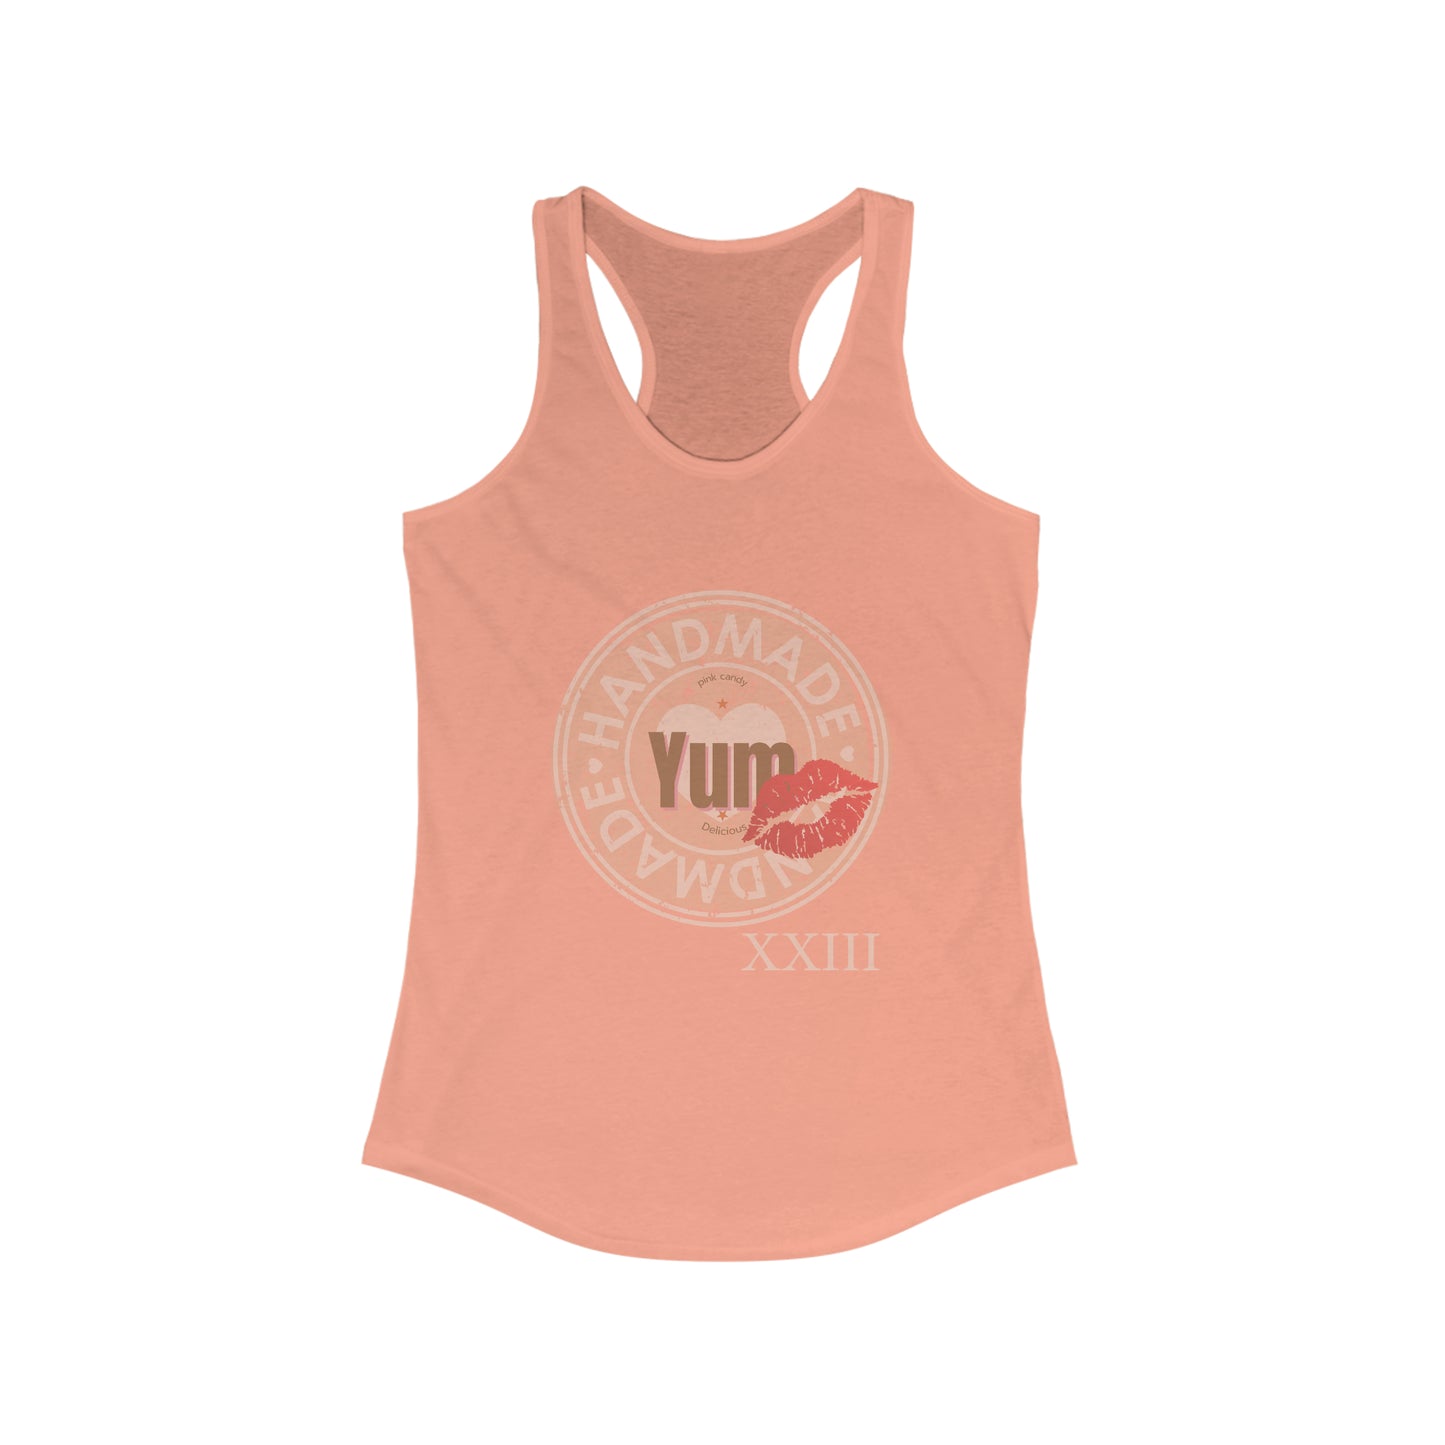 Peach racerback tank top with "Yum" graphic print on front.